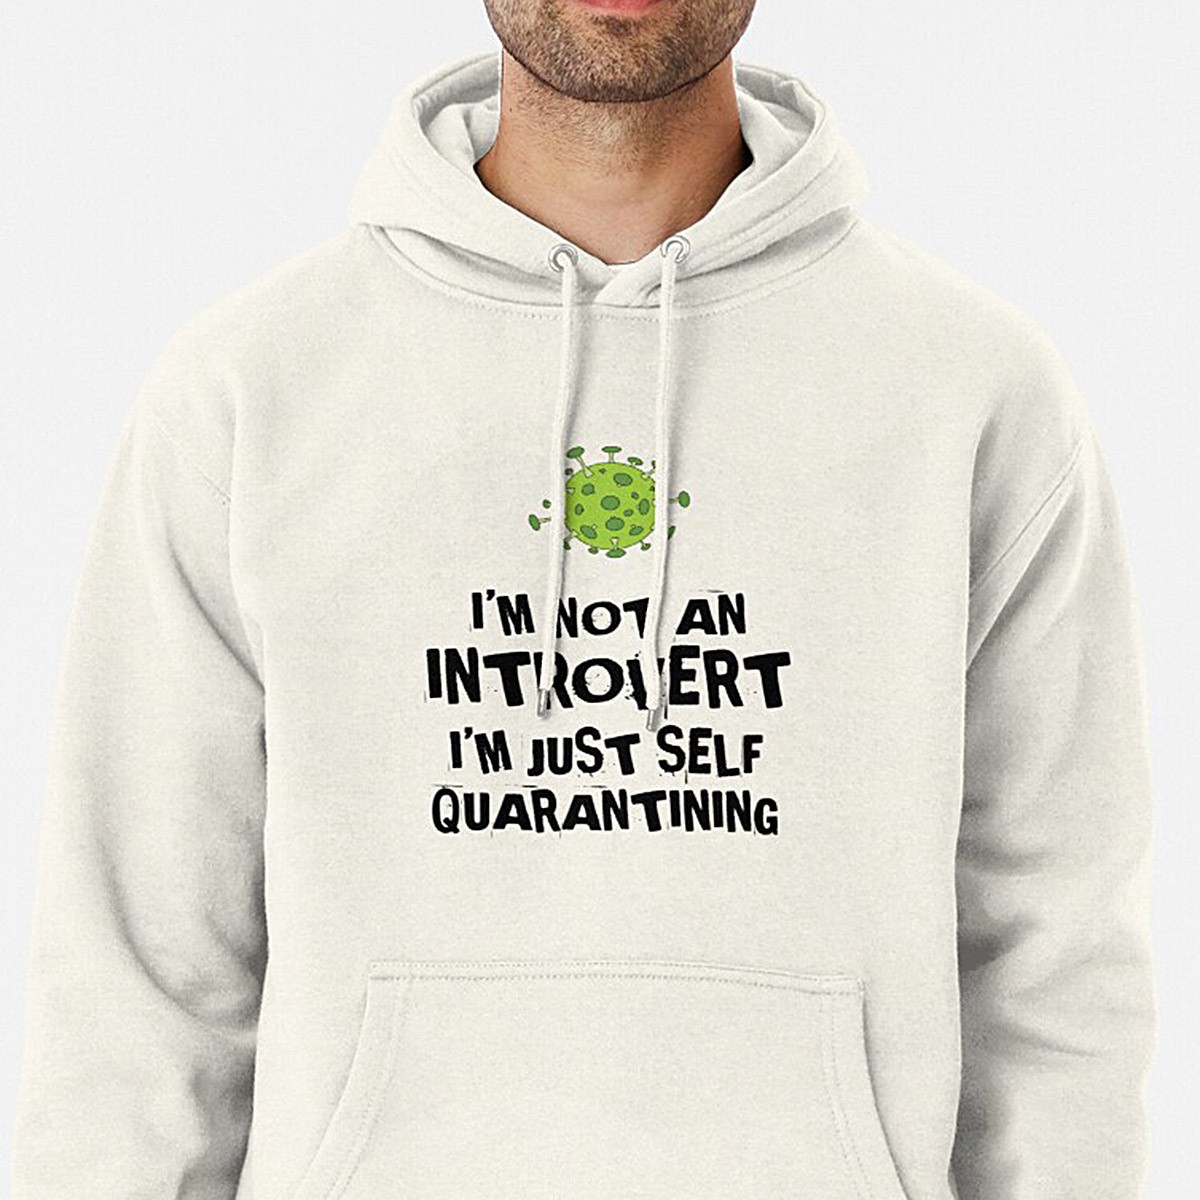 Not an Introvert - Just Self Quarantining! Hoodie by NTK Apparel